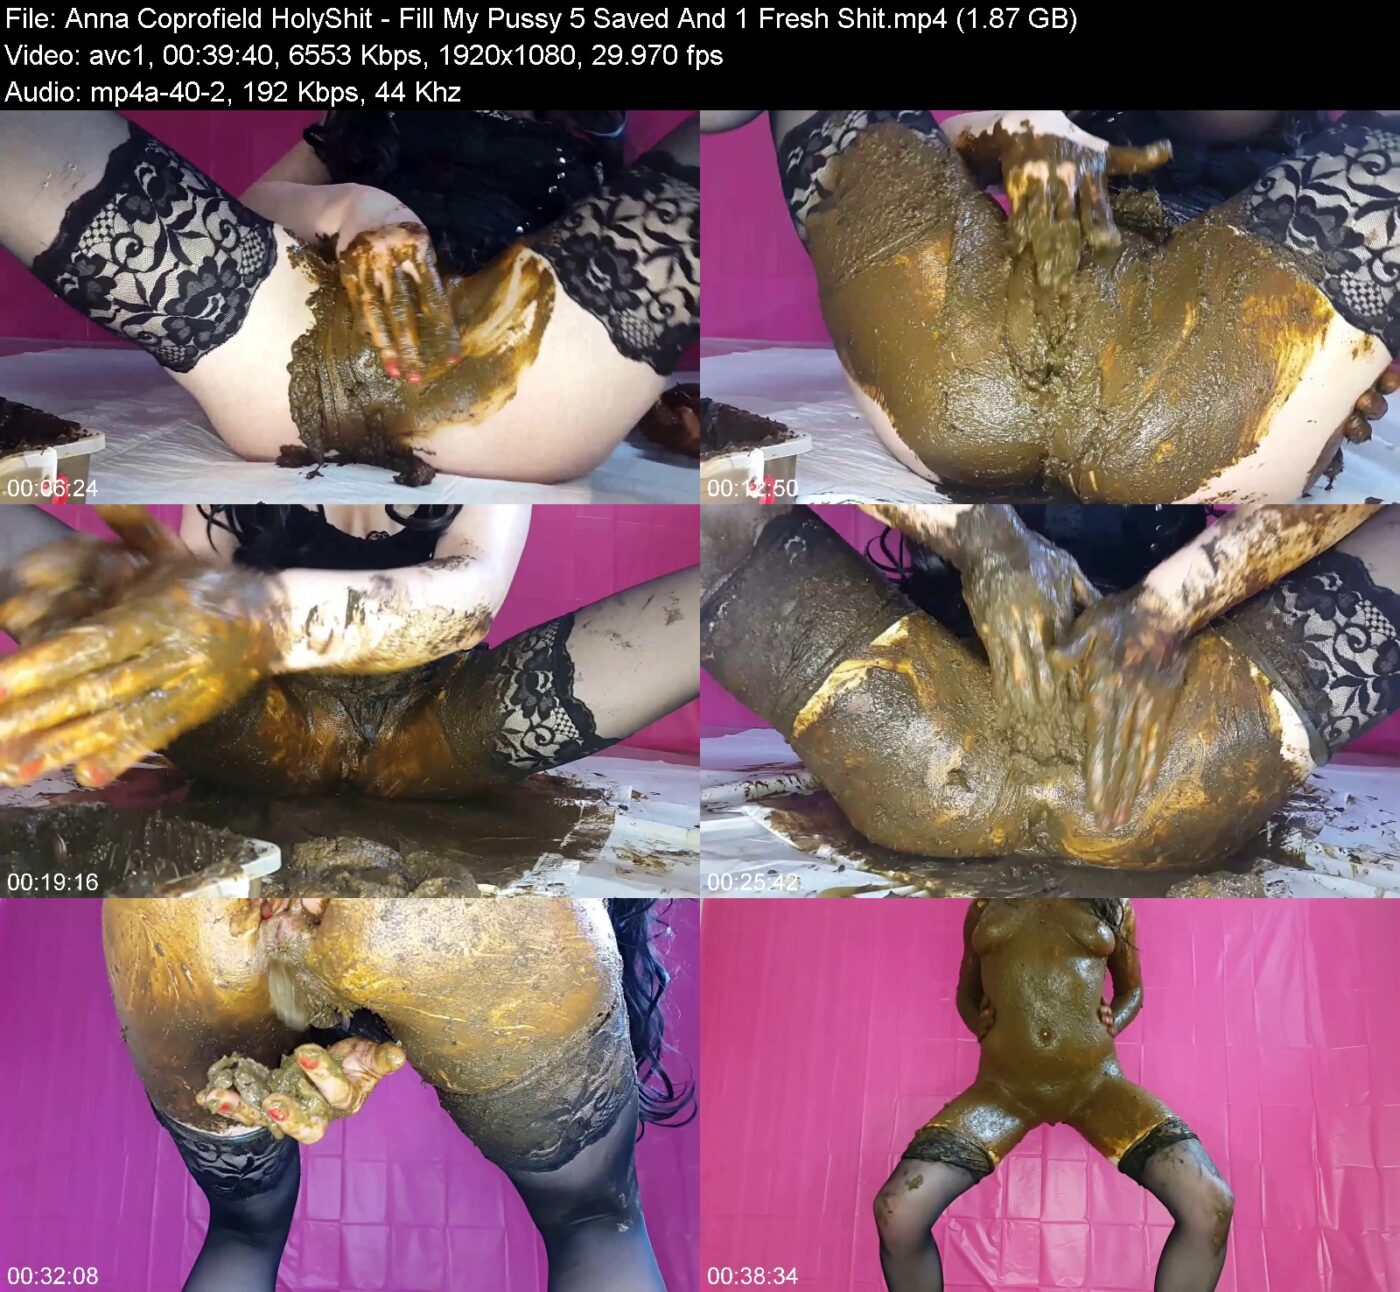 Anna Coprofield HolyShit - Fill My Pussy 5 Saved And 1 Fresh Shit